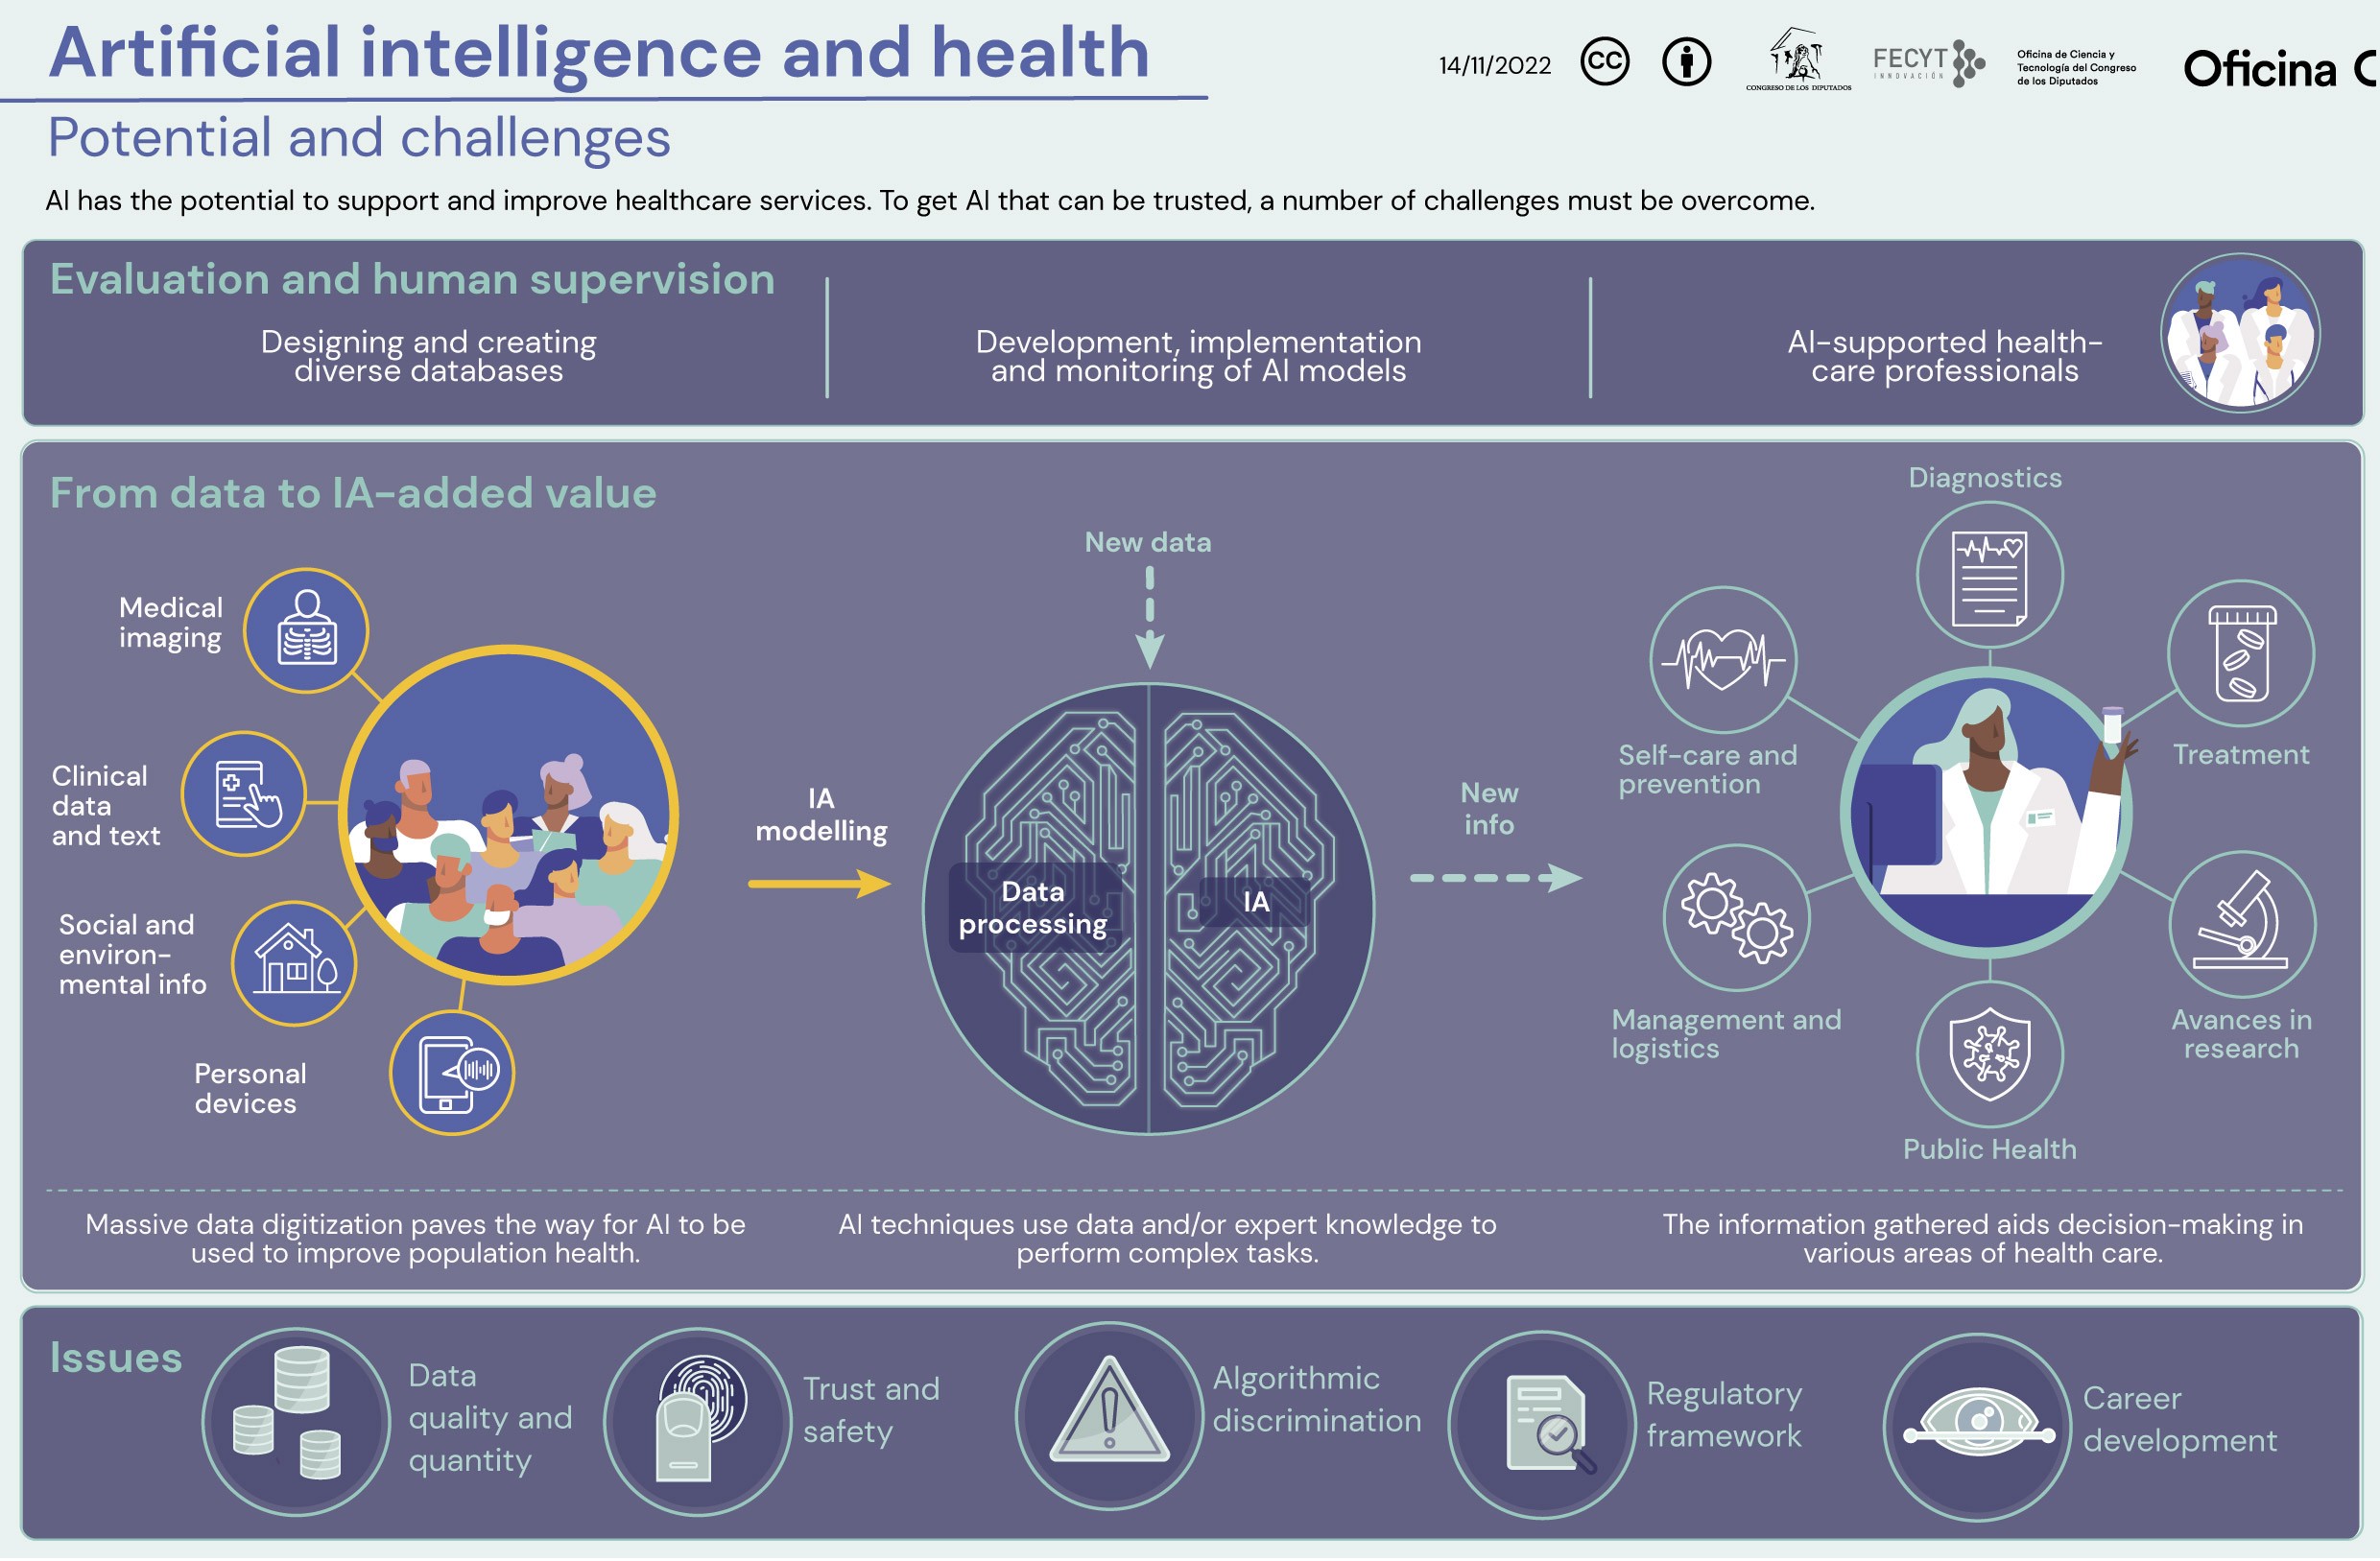 Artificial intelligence and health: graphical abstract